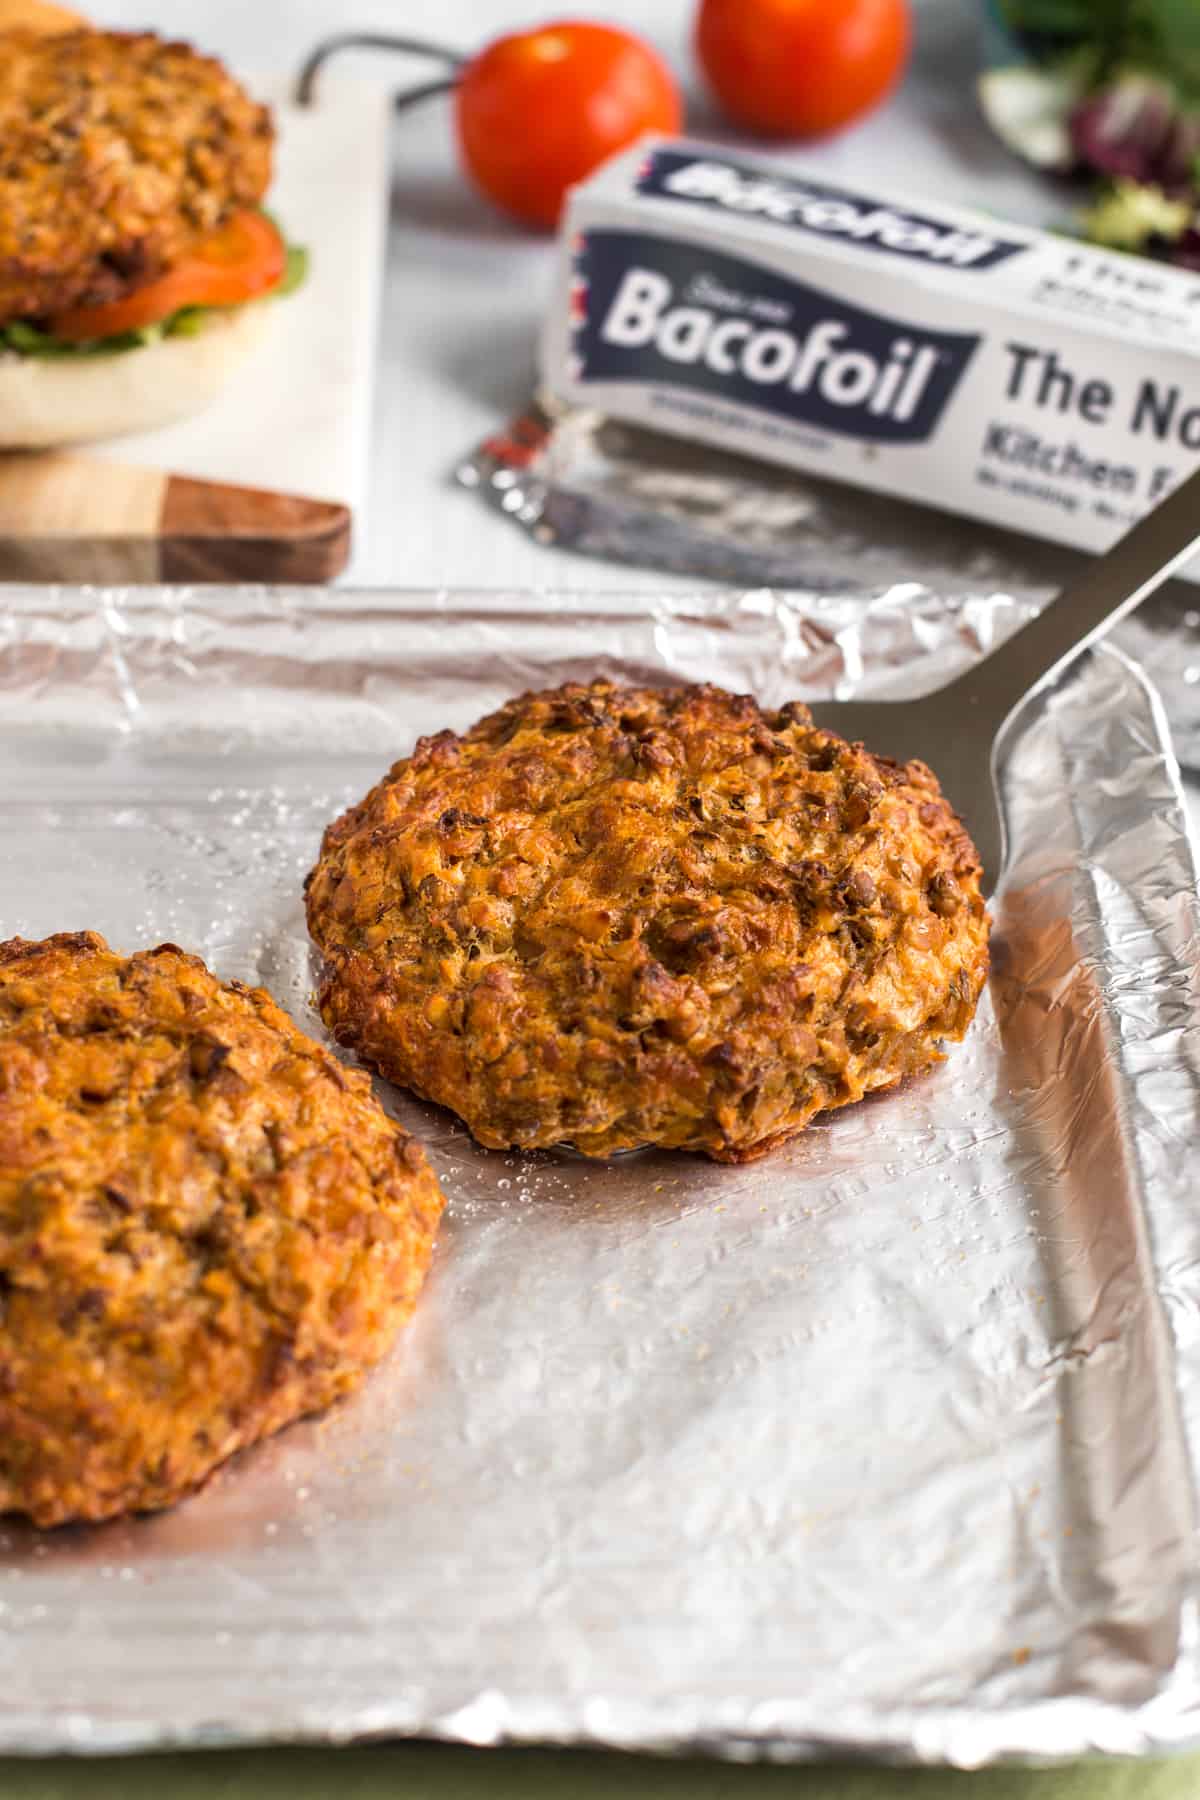 Cheesy lentil burger on a foil-lined baking tray.